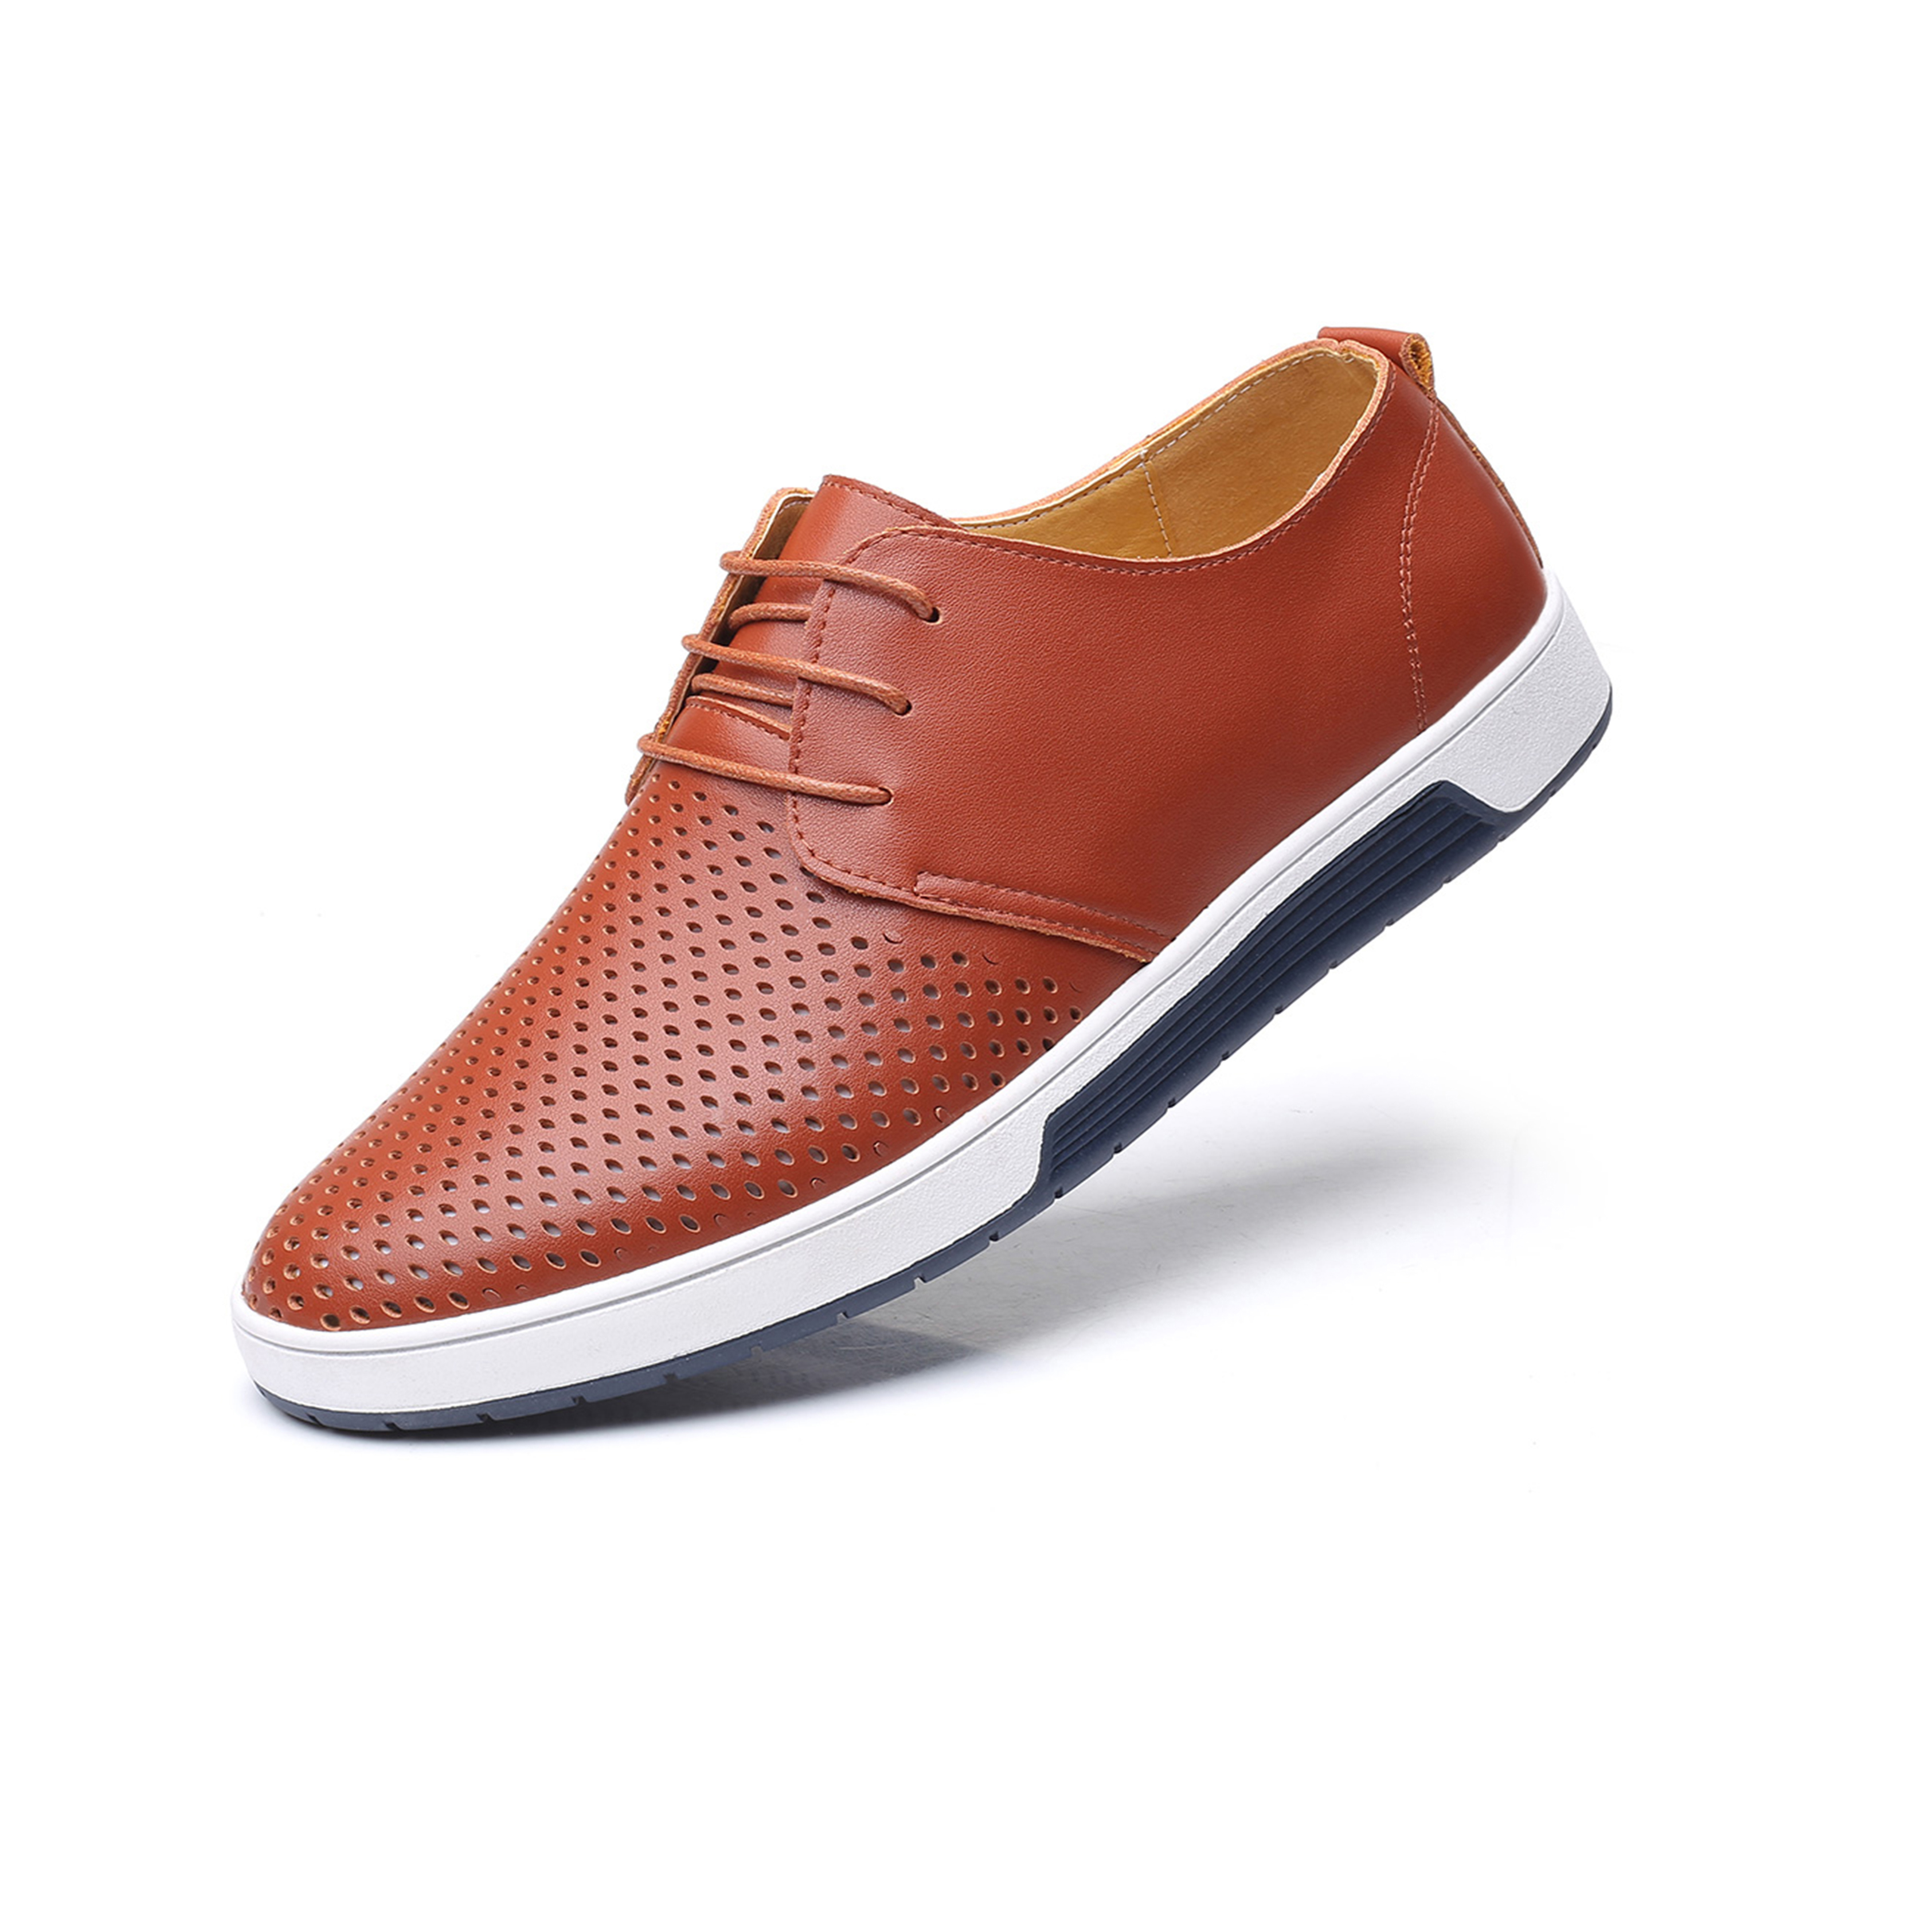 Summer Breathable Shoes | Calceus